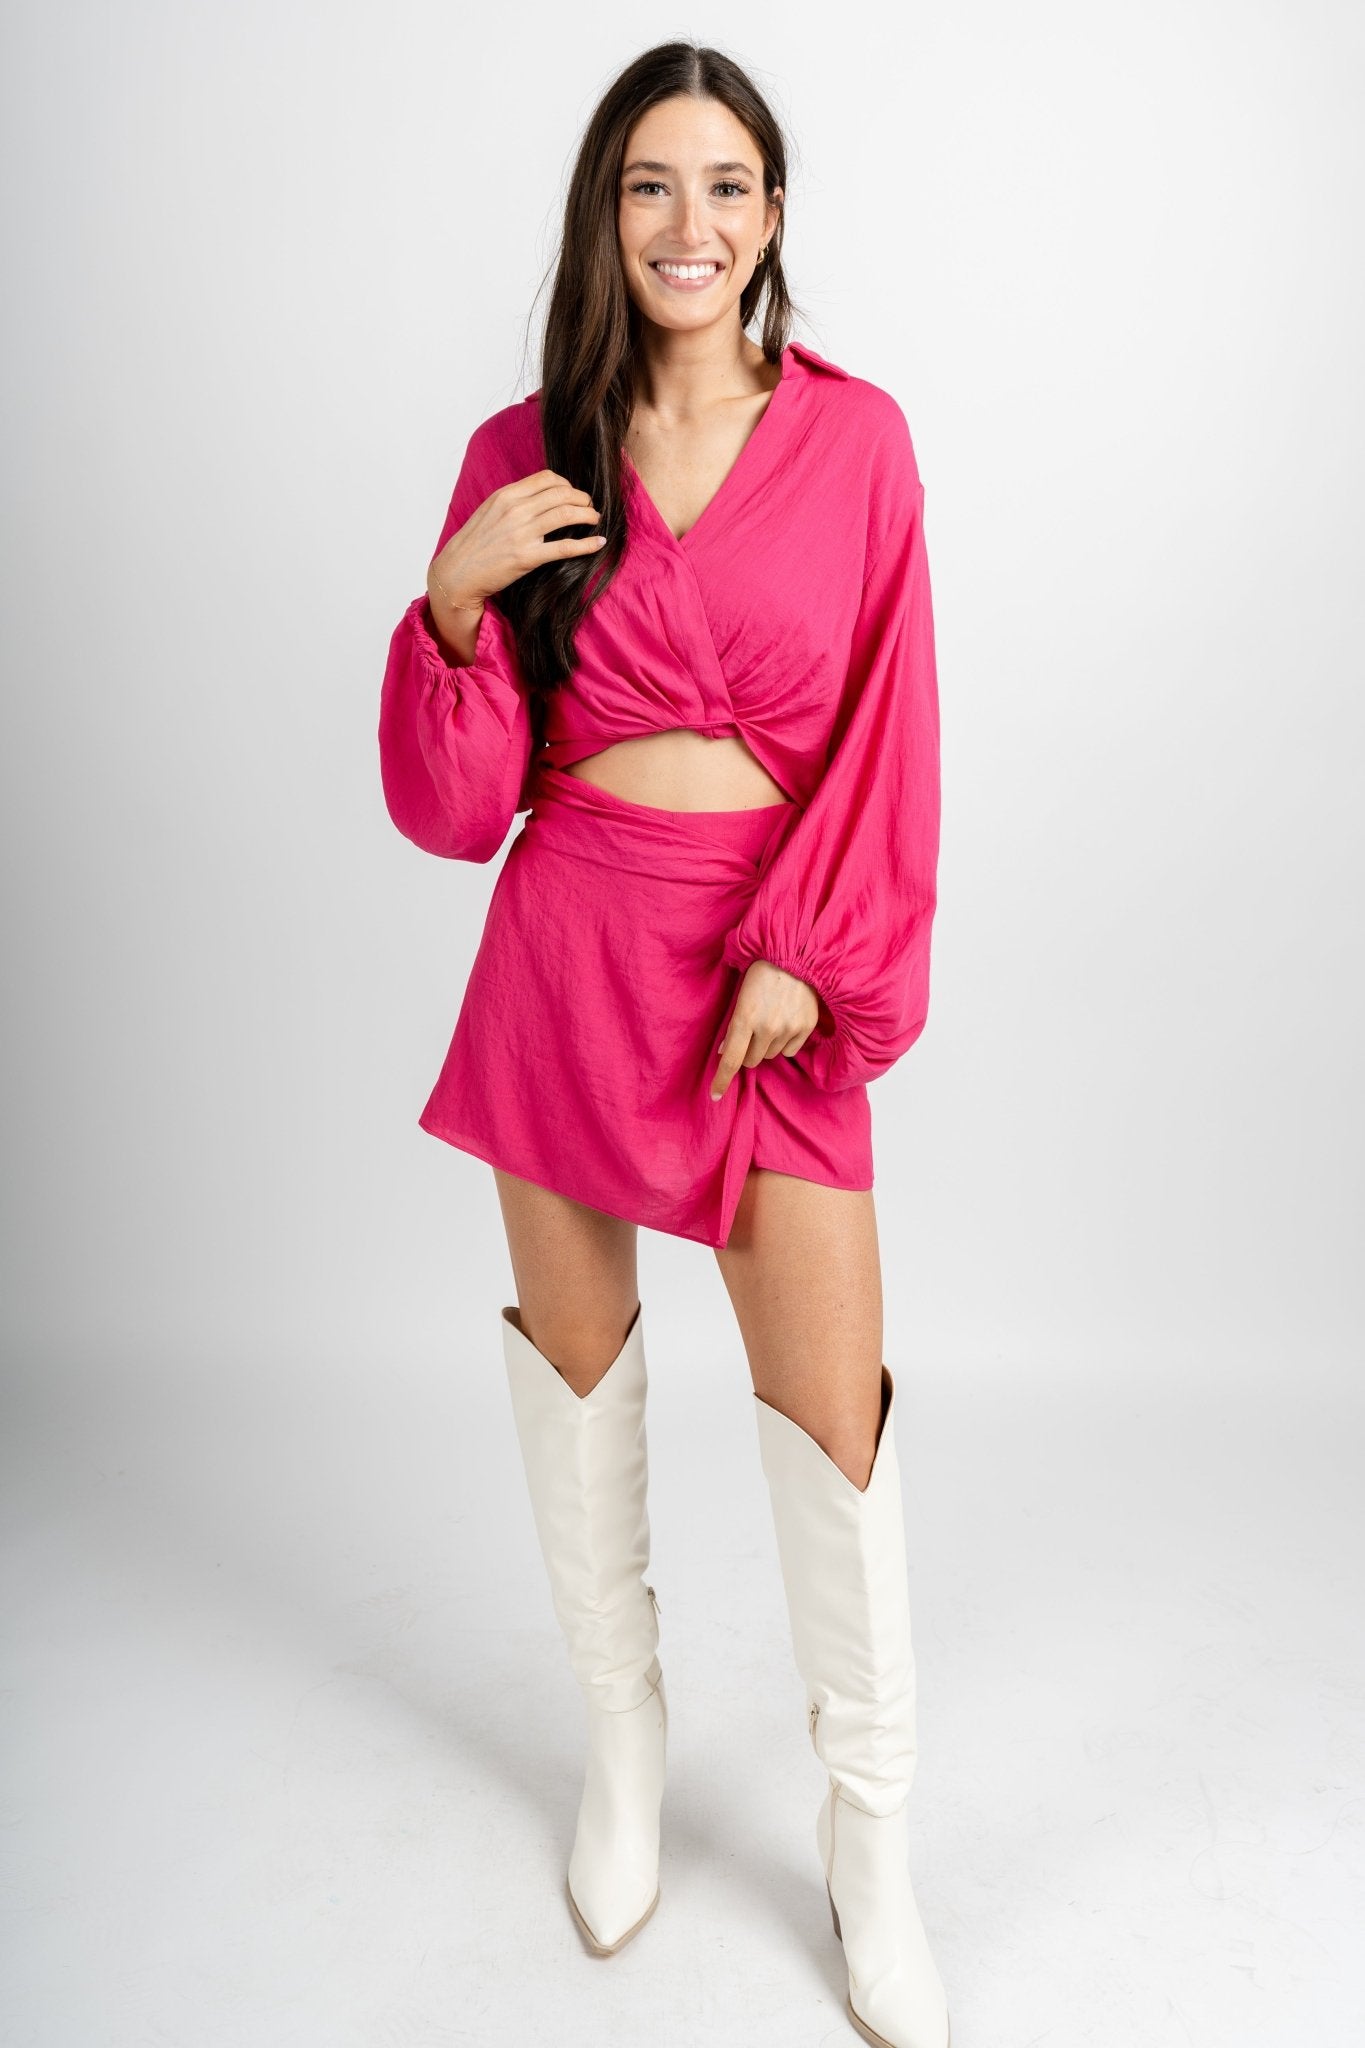 Knotted mini skirt hot pink | Lush Fashion Lounge: boutique fashion skirts, affordable boutique skirts, cute affordable skirts